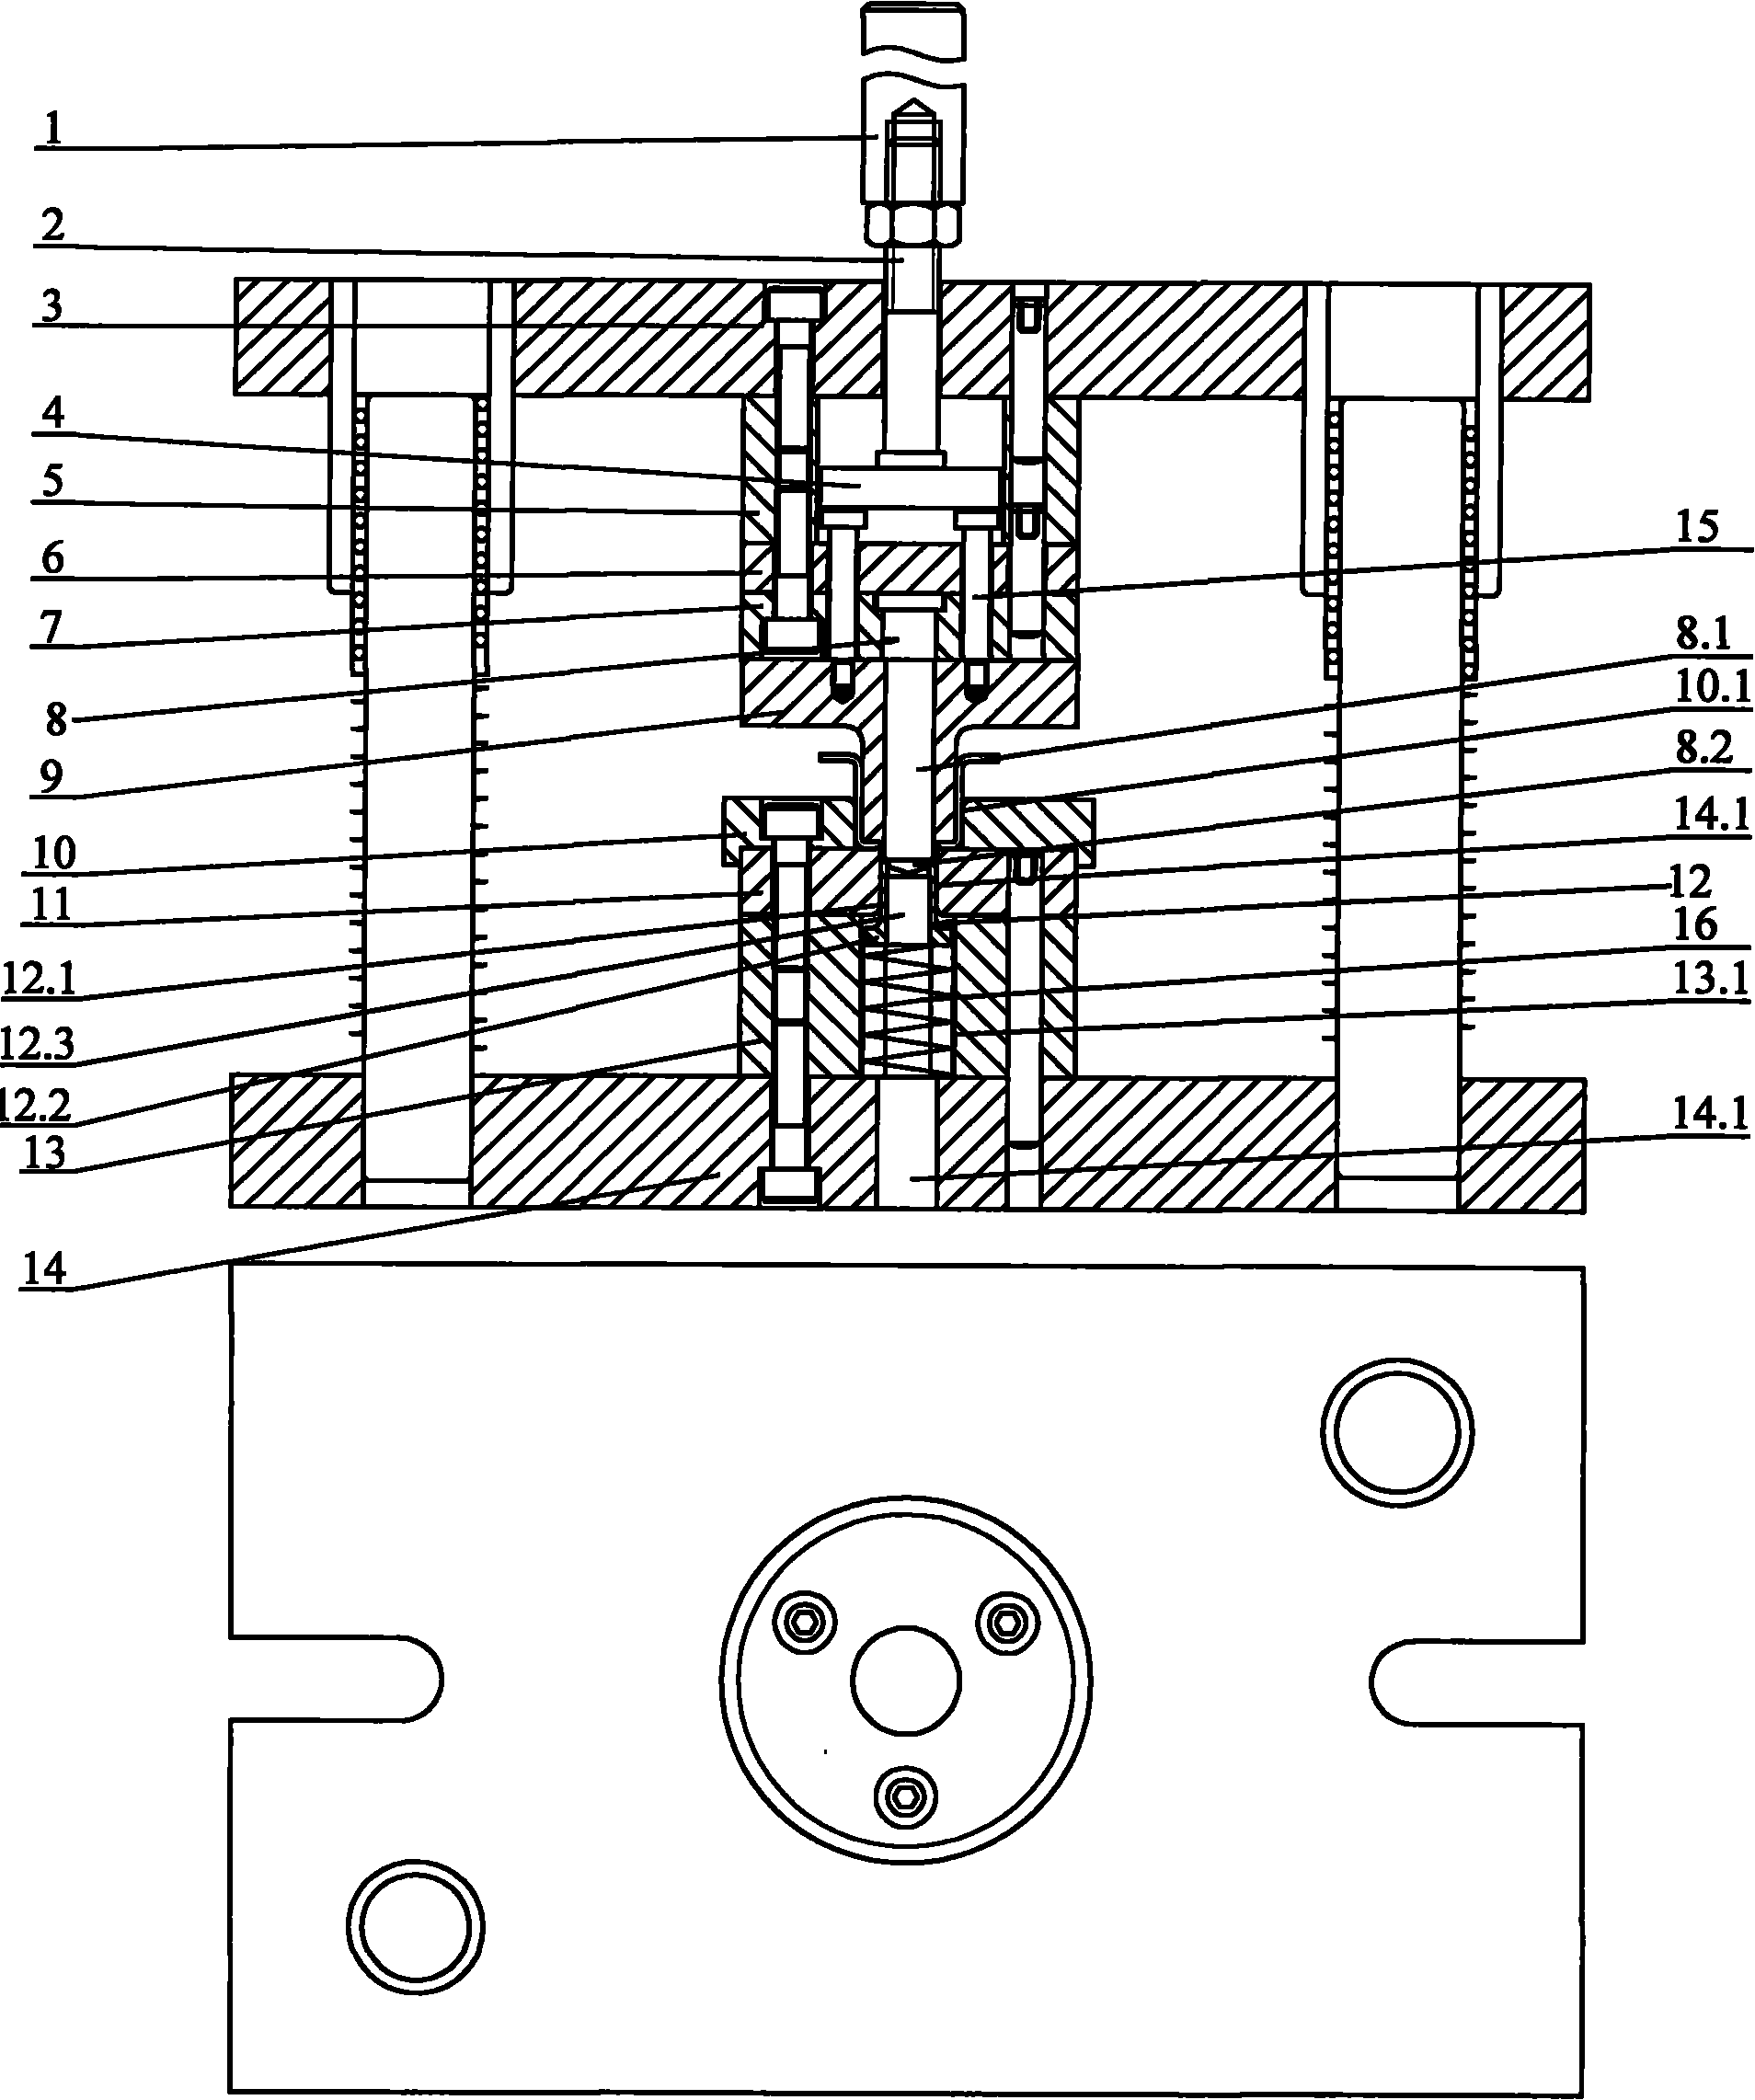 Punching/hole flanging die for internal supporting tube of auto shock absorber